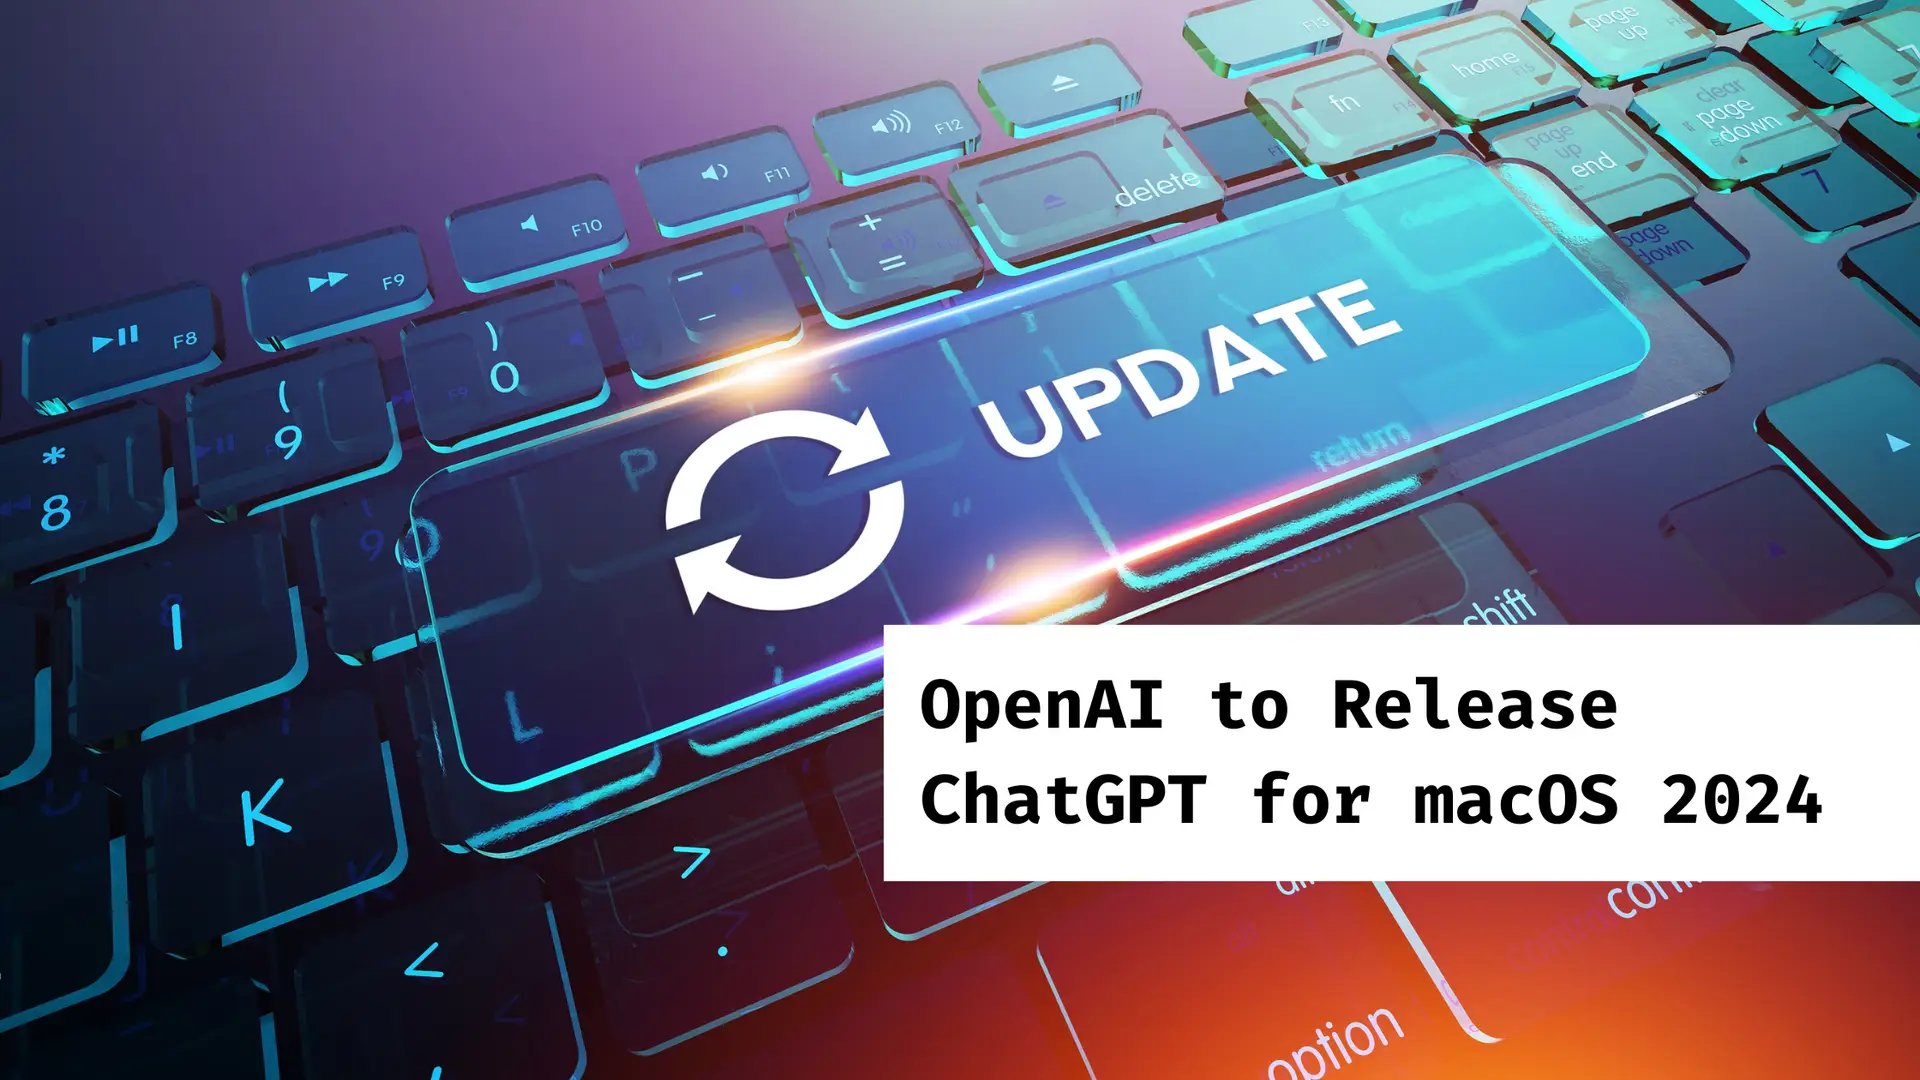 OpenAI to Release ChatGPT for macOS 2024